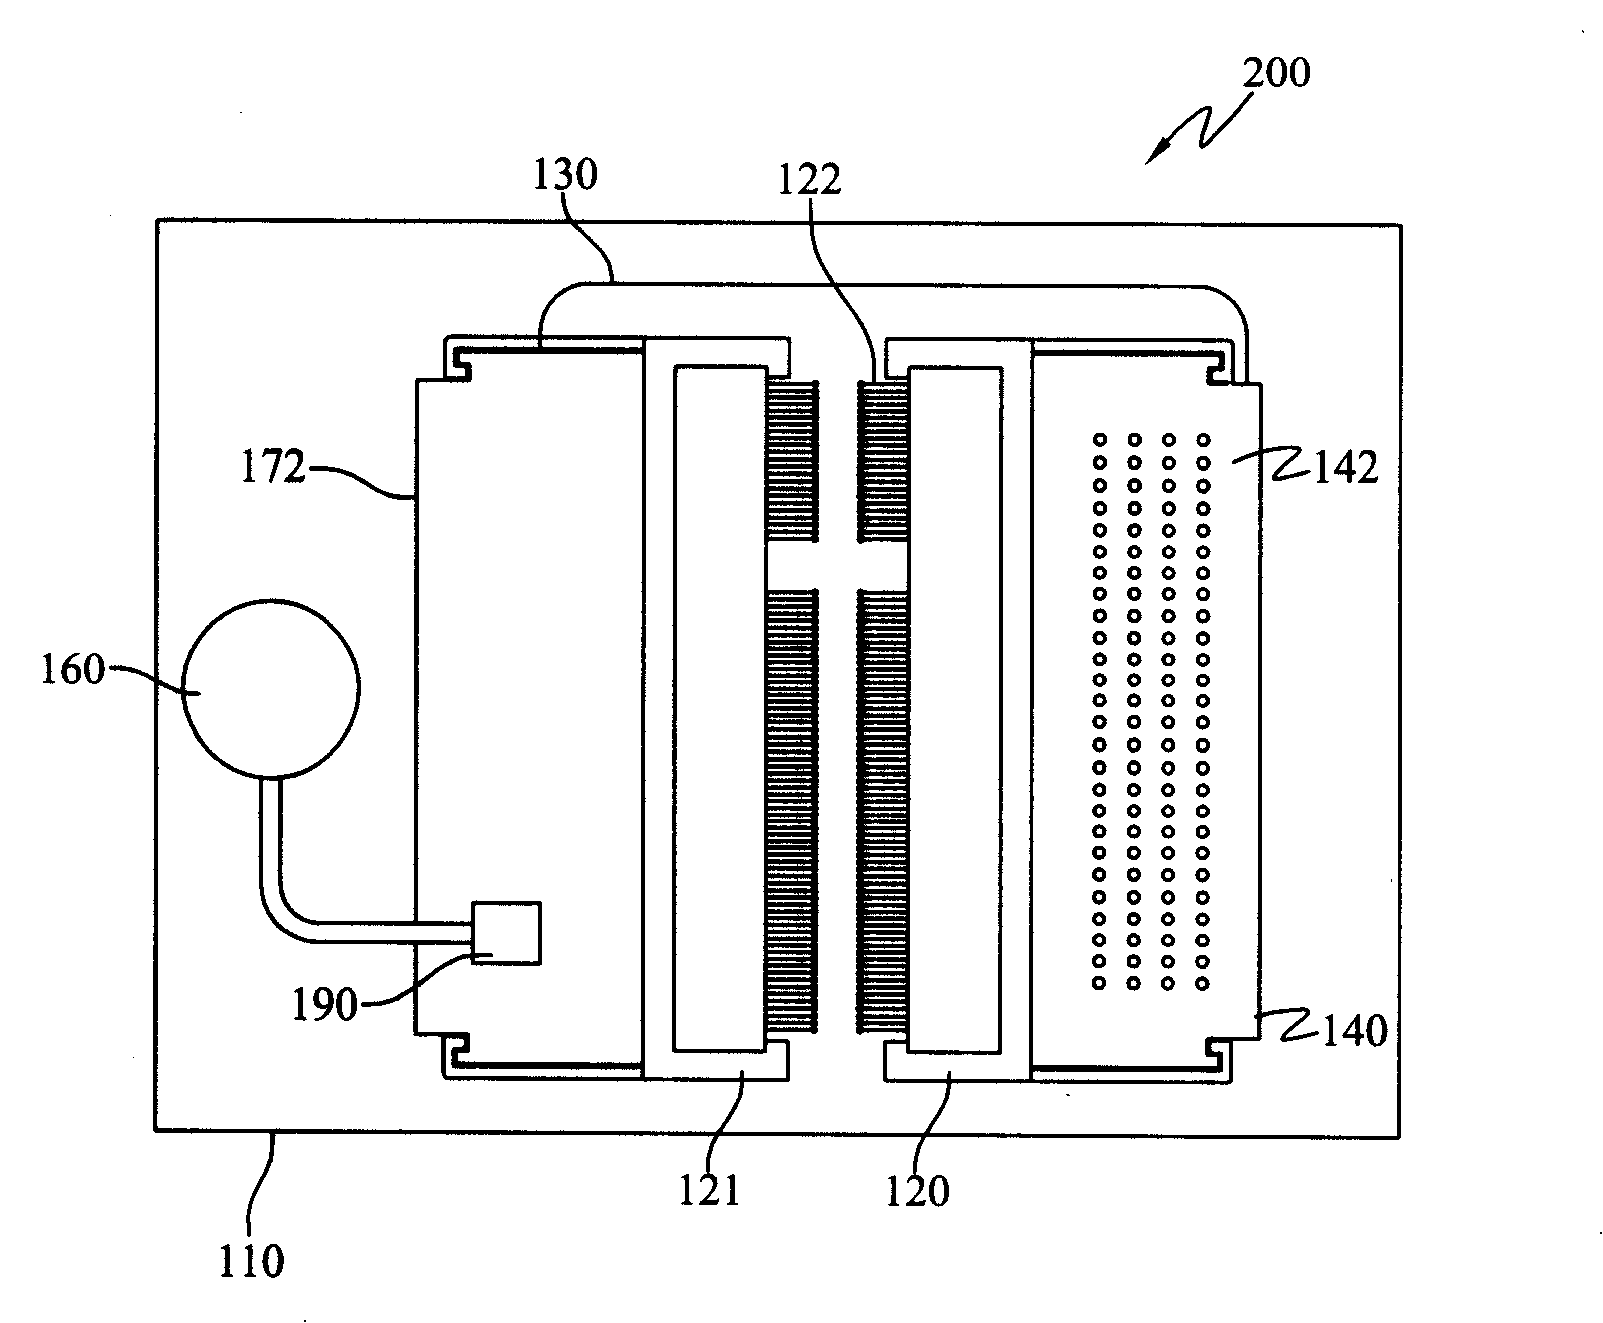 Signal circuit detection device